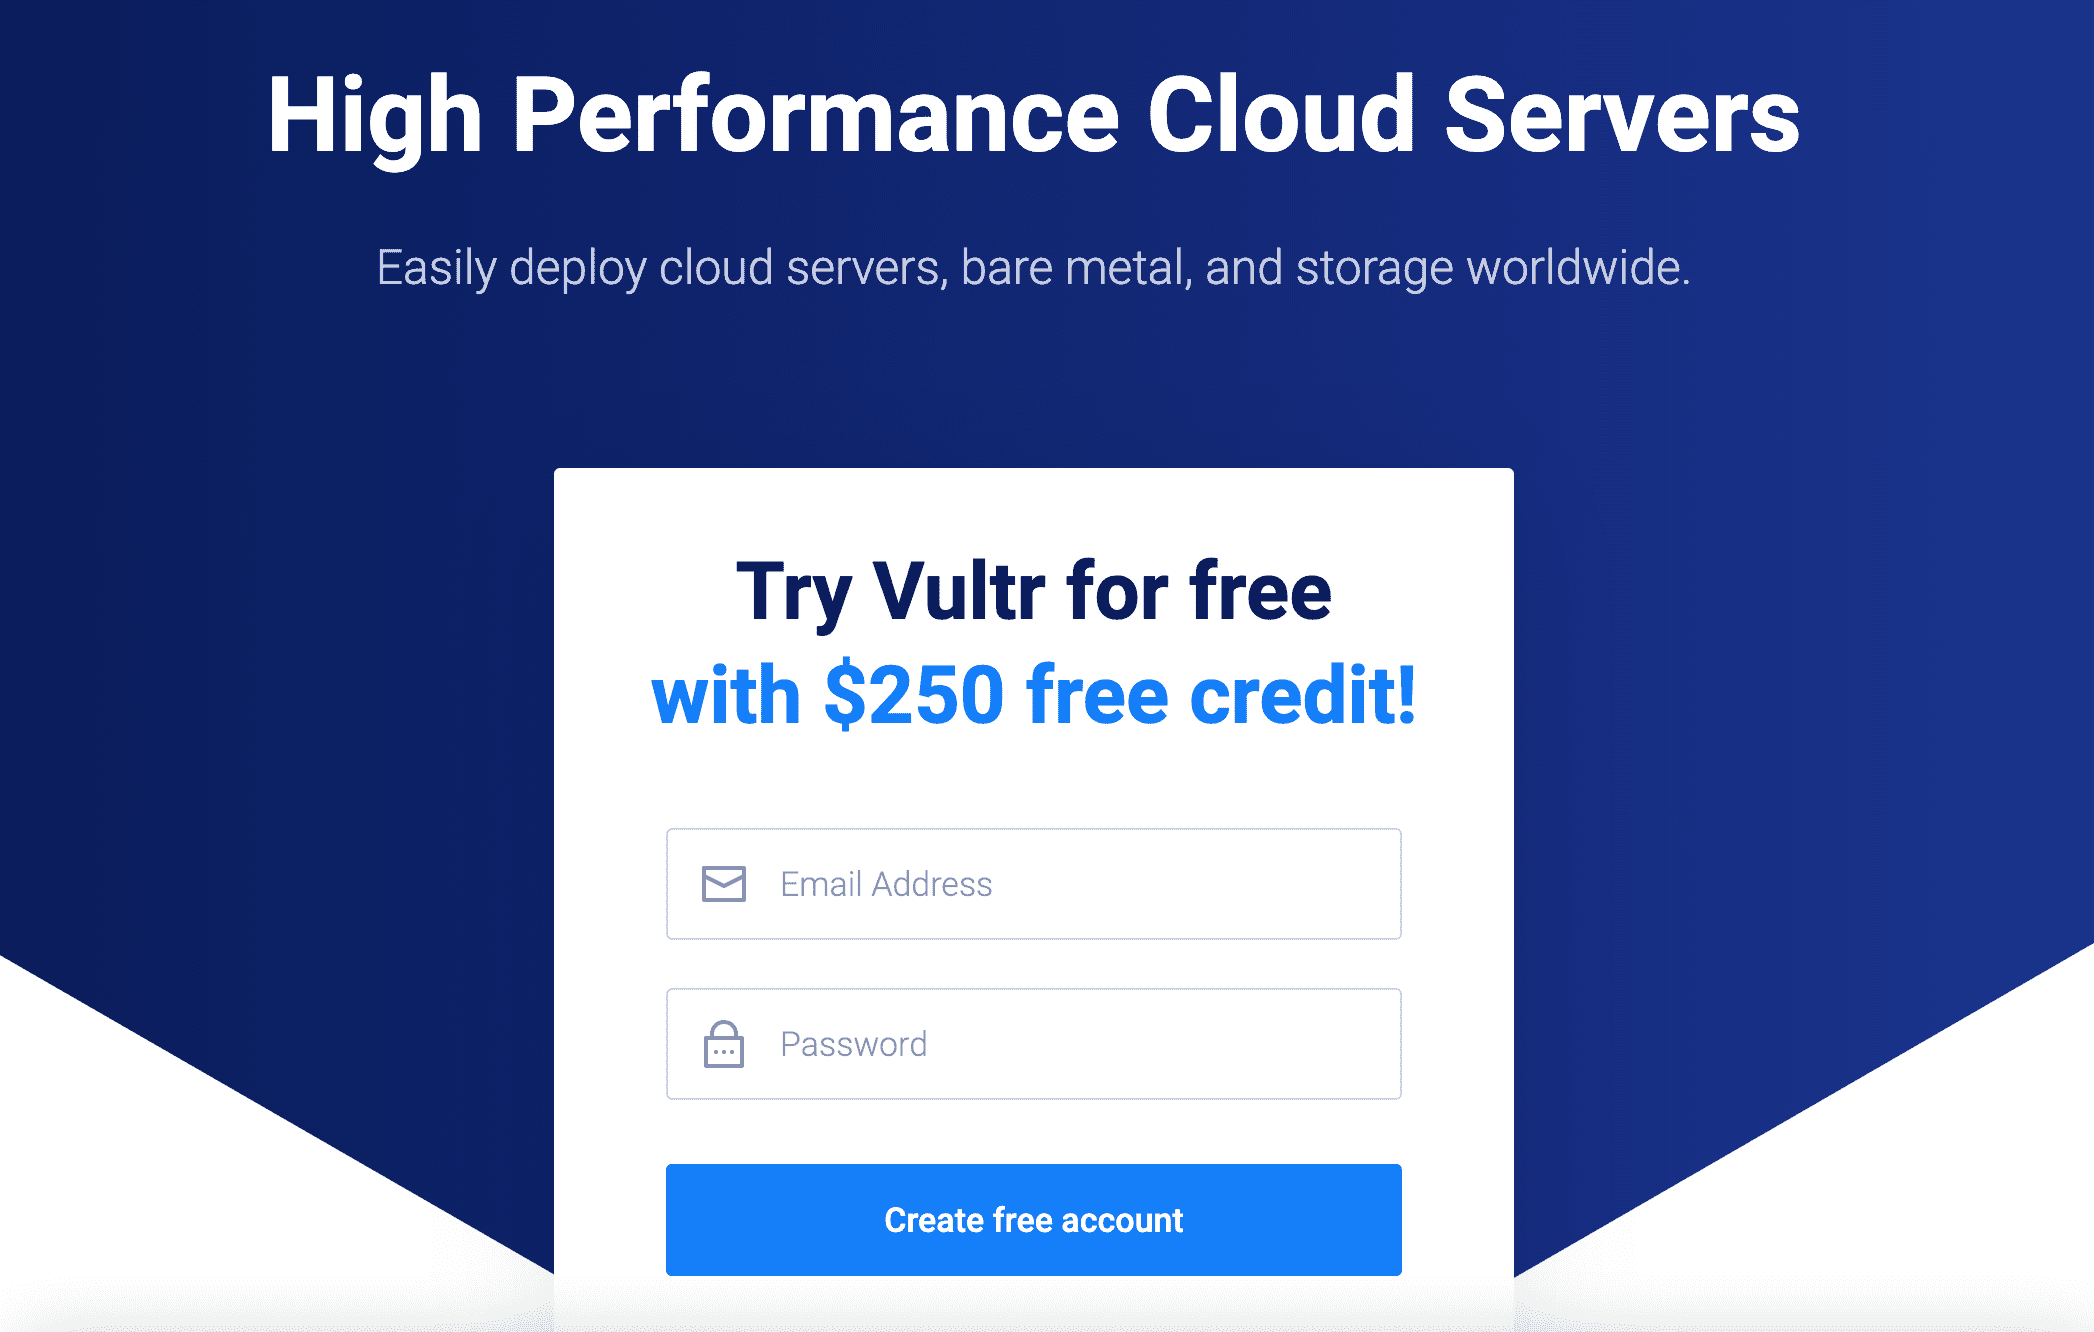 vultr coupon code $250